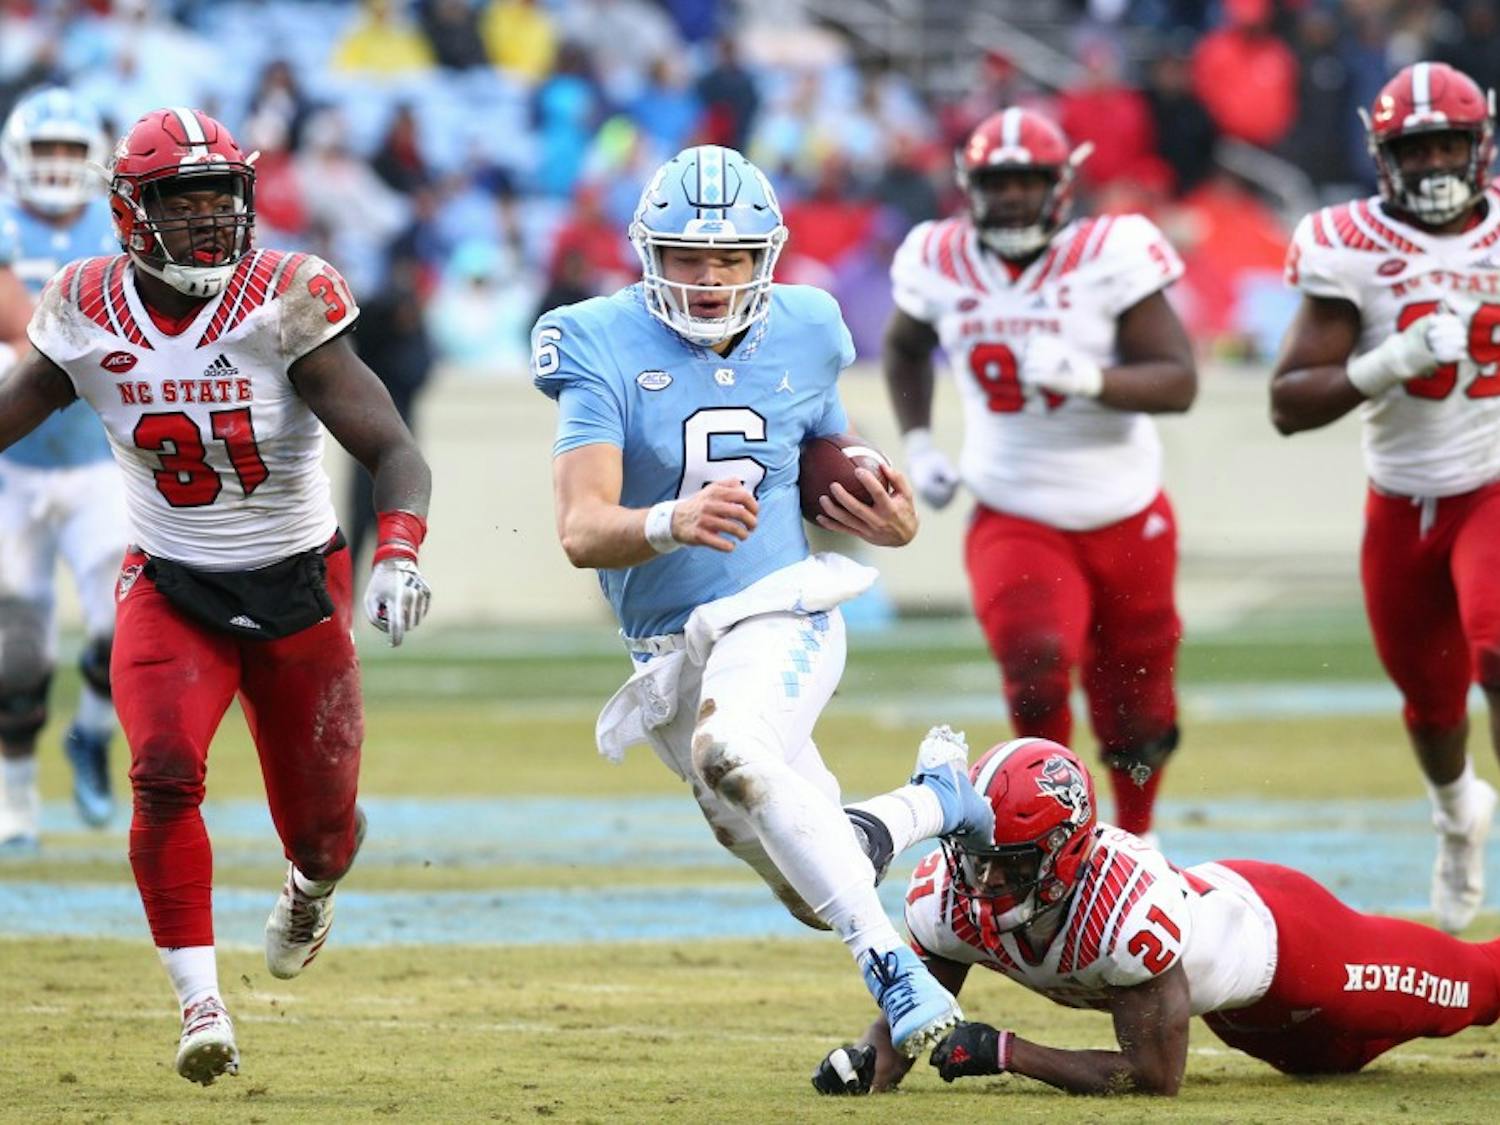 Cade Fortin (6) rushes against NC State on Saturday, Nov. 24, 2018 in Kenan Memorial Stadium. NC State beat UNC 34-28 in overtime.